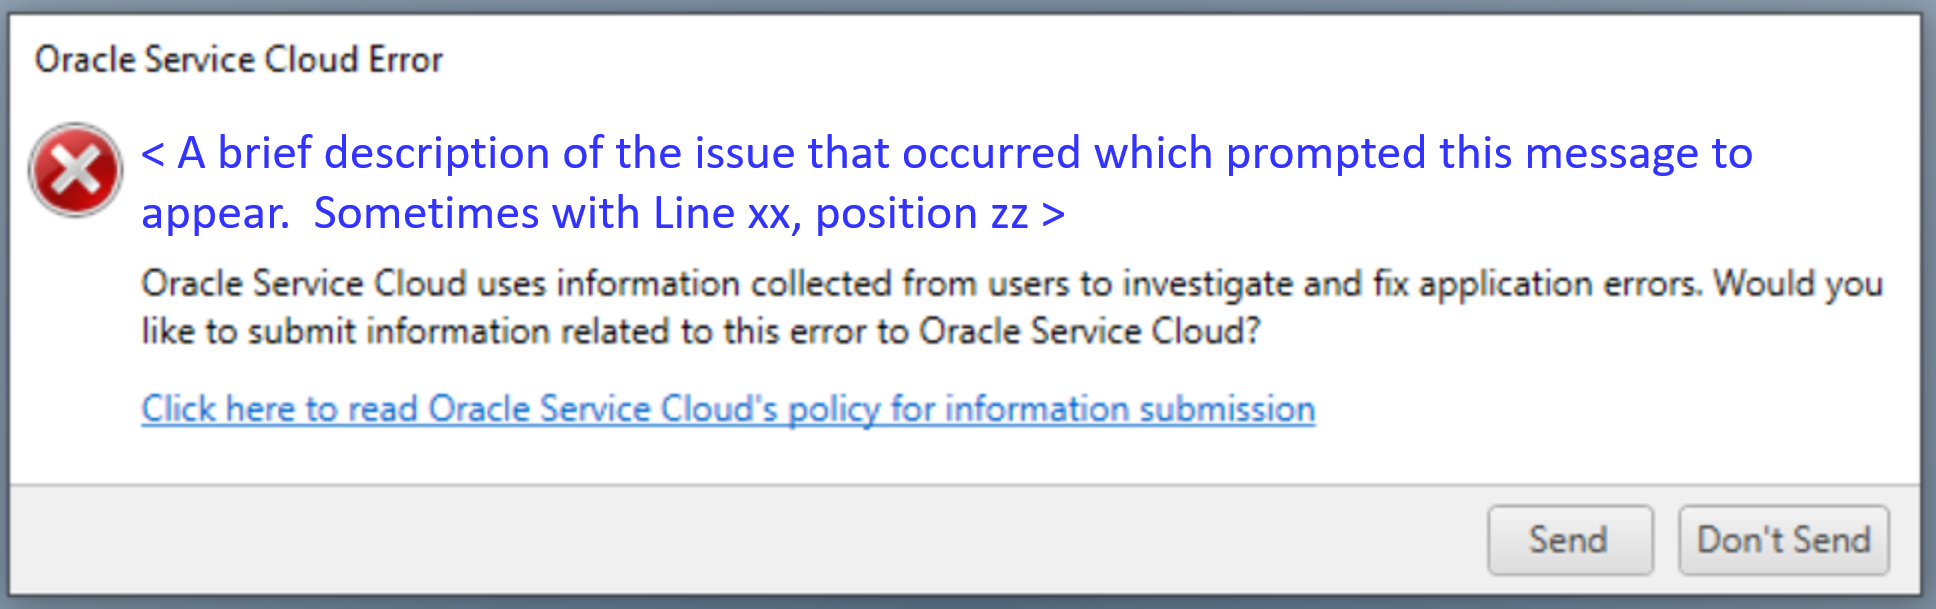 Error screenshot, Oracle Service Cloud Error <A brief description of the issue that occurred which prompted this message to appear.  Sometimes with Line xx, position zz >, Oracle Service Cloud uses information collected from users to investigate and fix application errors. Would you like to submit information related to this error to Oracle Service Cloud?